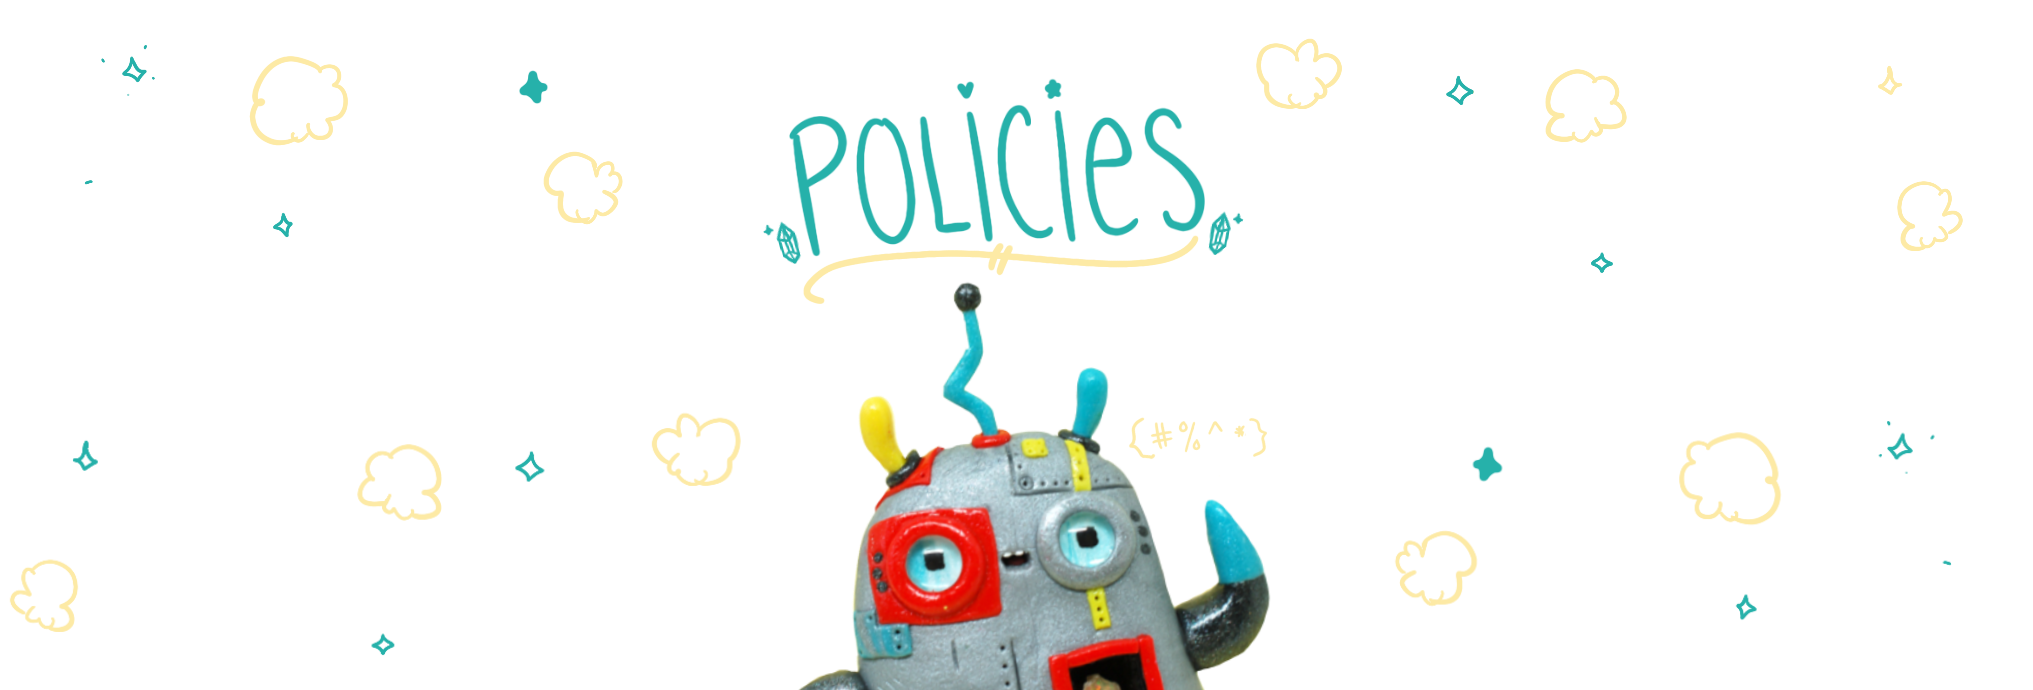 Policies image with Reboot the robot weebeast 